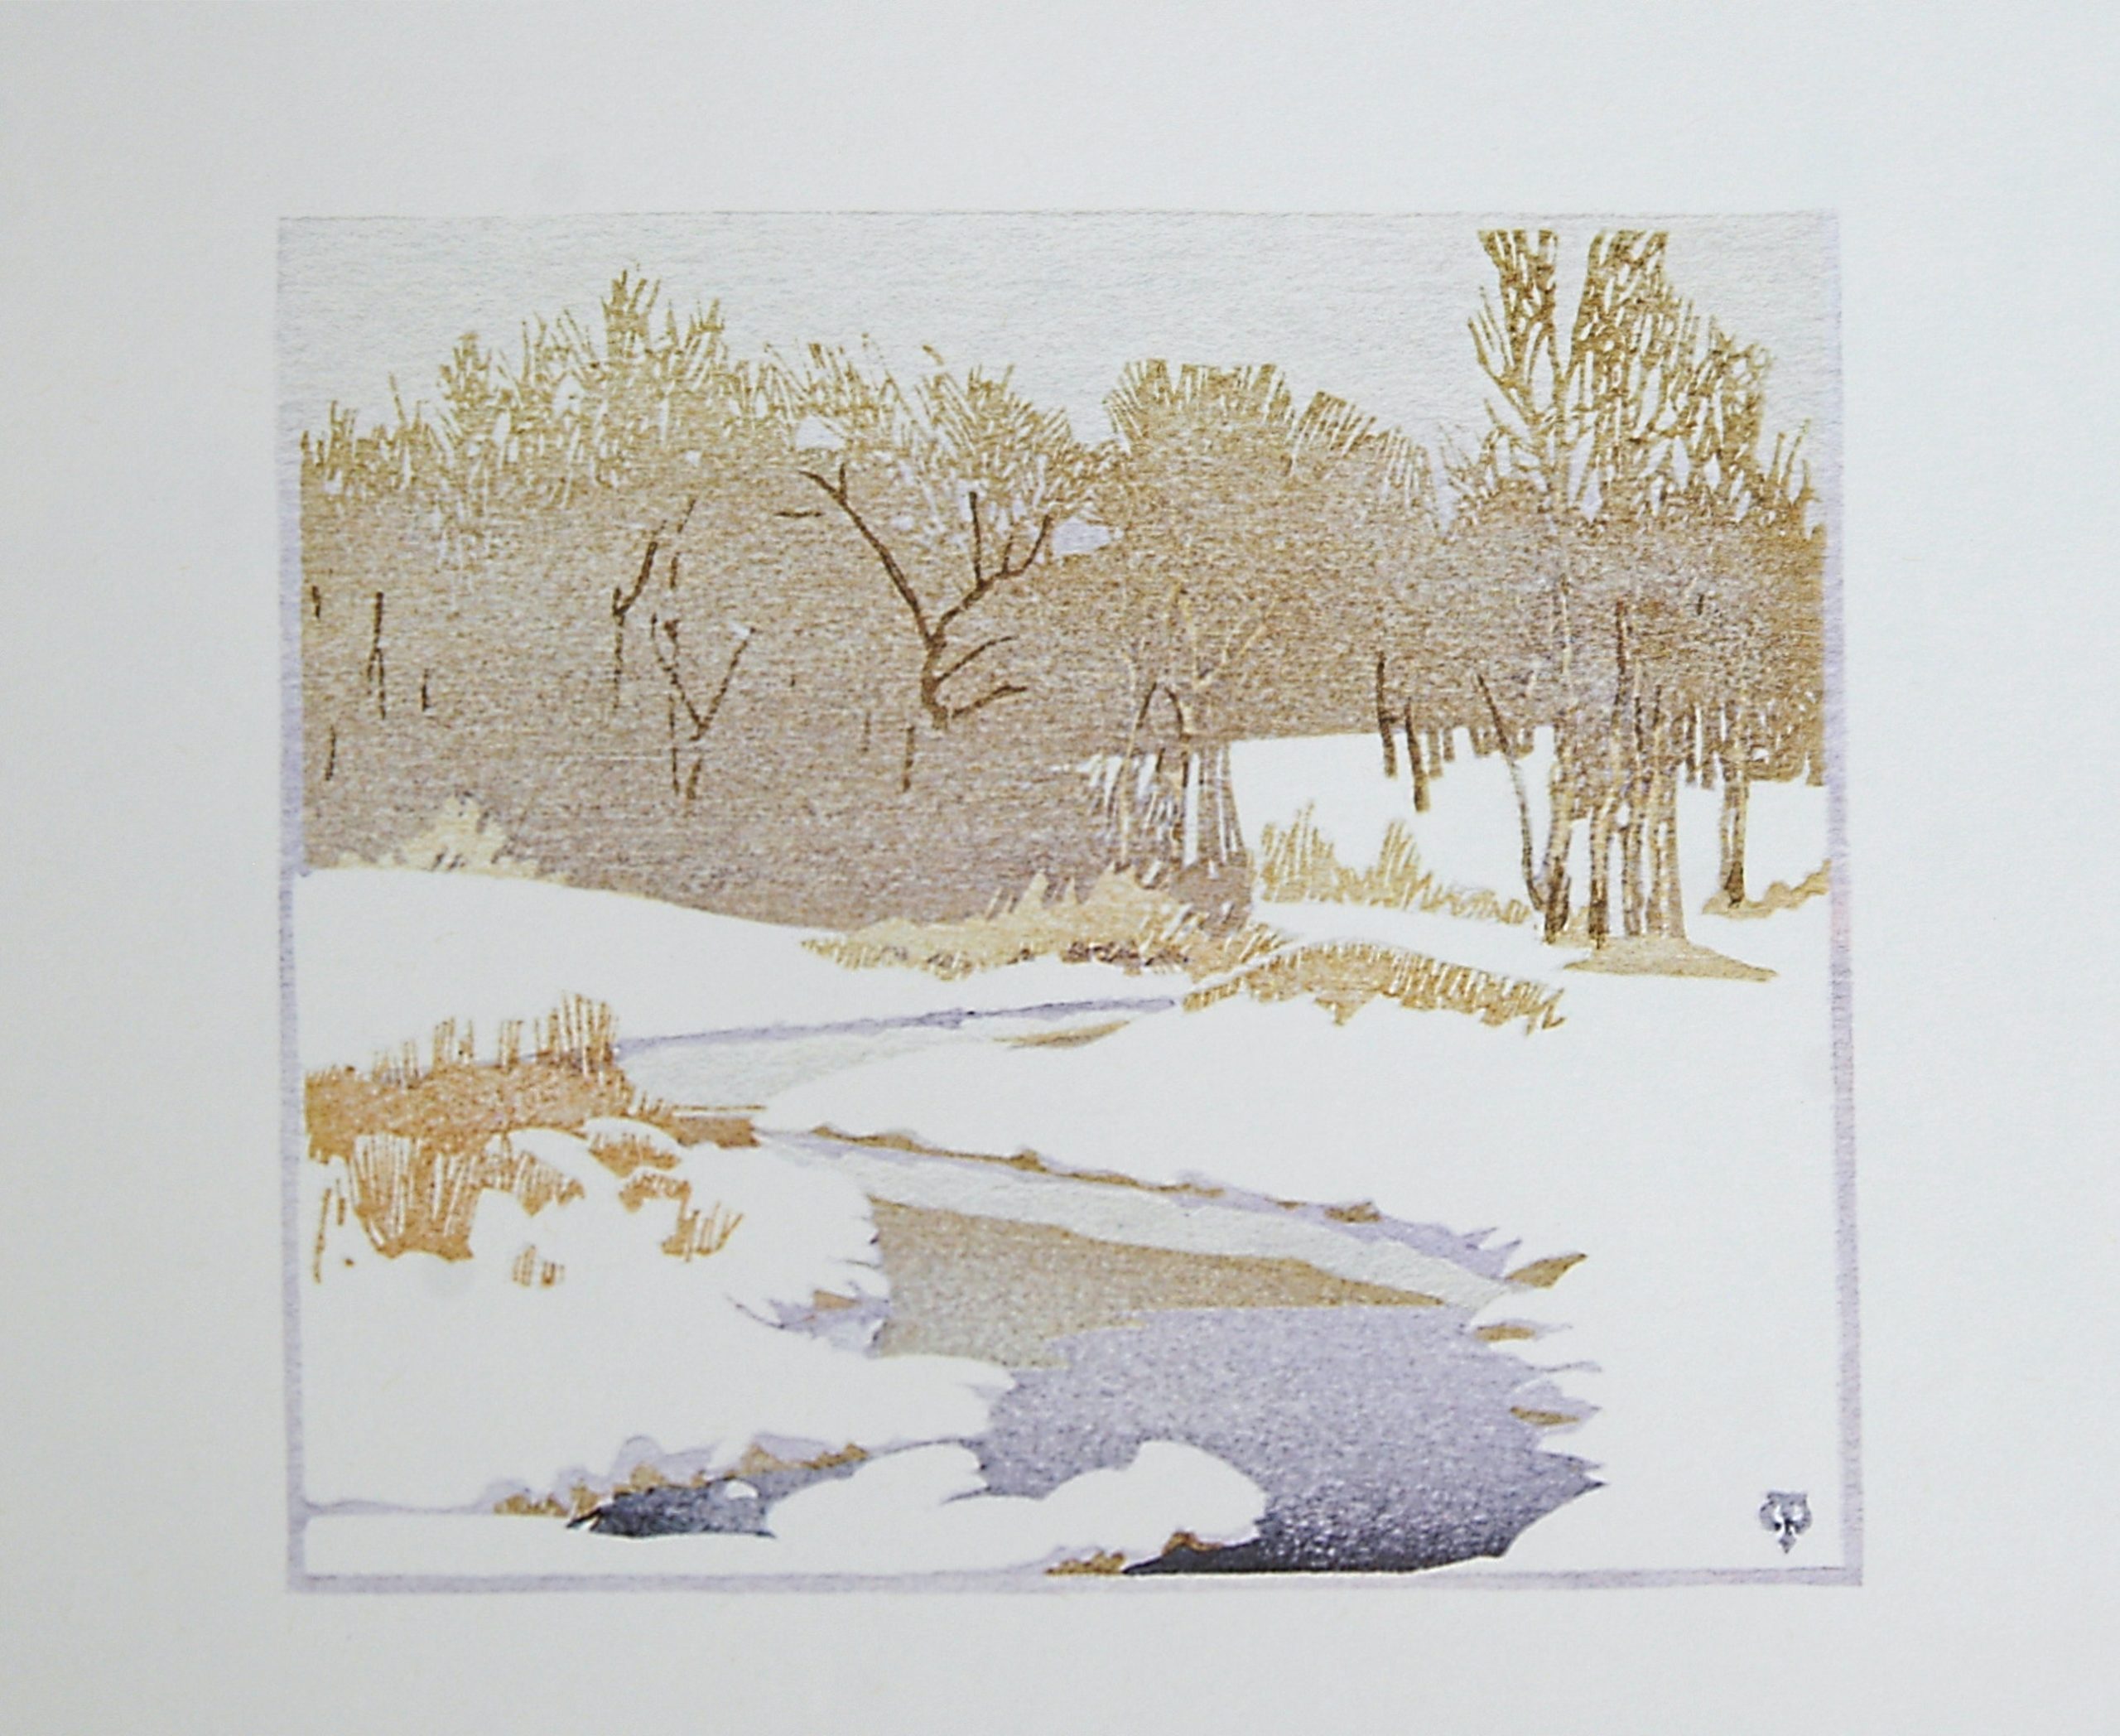 The Stream in Winter by WJ Phillips